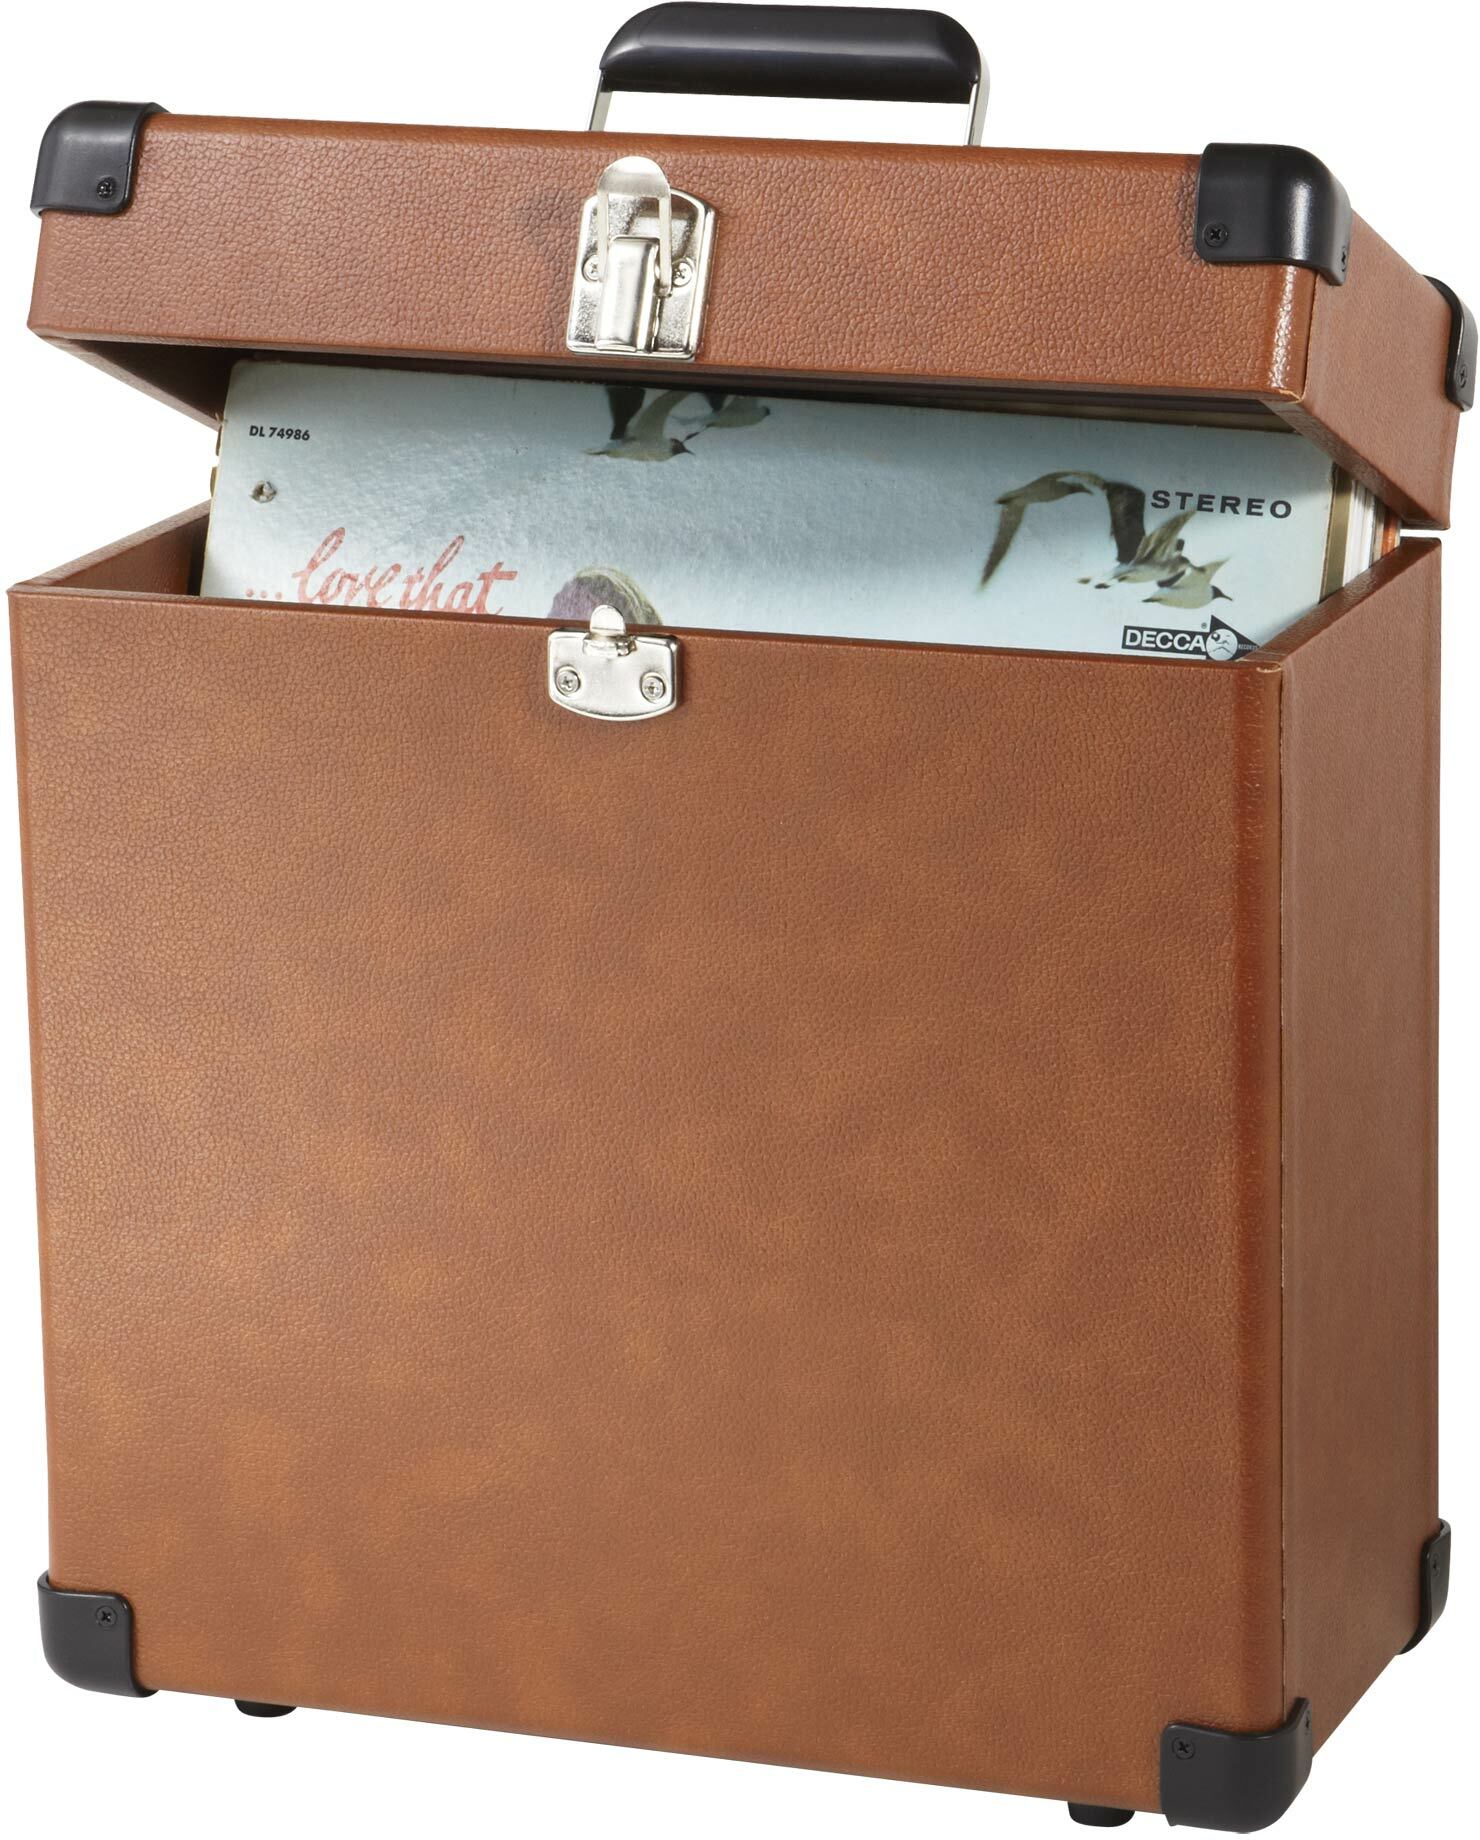 Crosley Record Carrier Case - DJ storage - Main picture